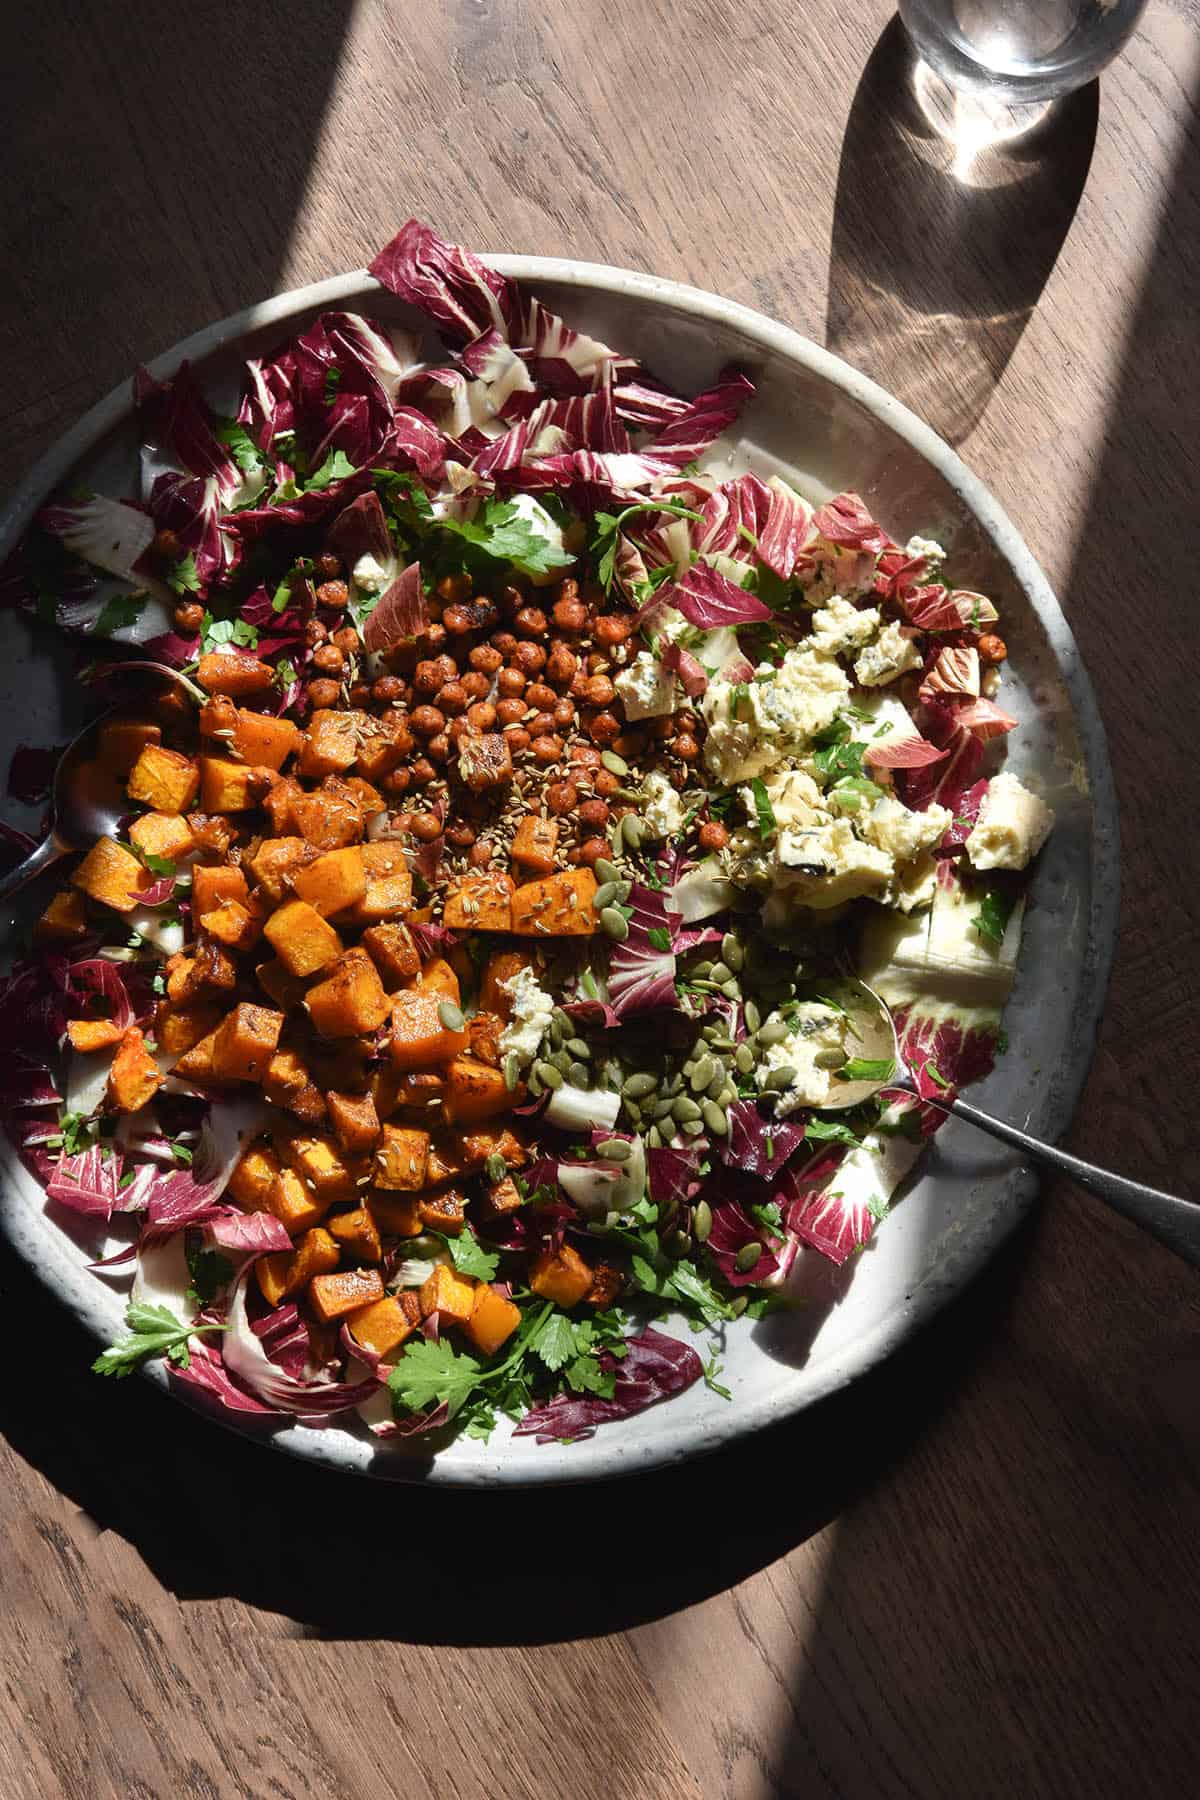 An aerial brightly sunlit view of a salad made up of radicchio, roasted pumpkin, smoky chickpeas, honey toasted walnuts and a low FODMAP salad dressing. The salad sits on a wooden backdrop in contrasting harsh light. A glass of water sits to the top right of the image.